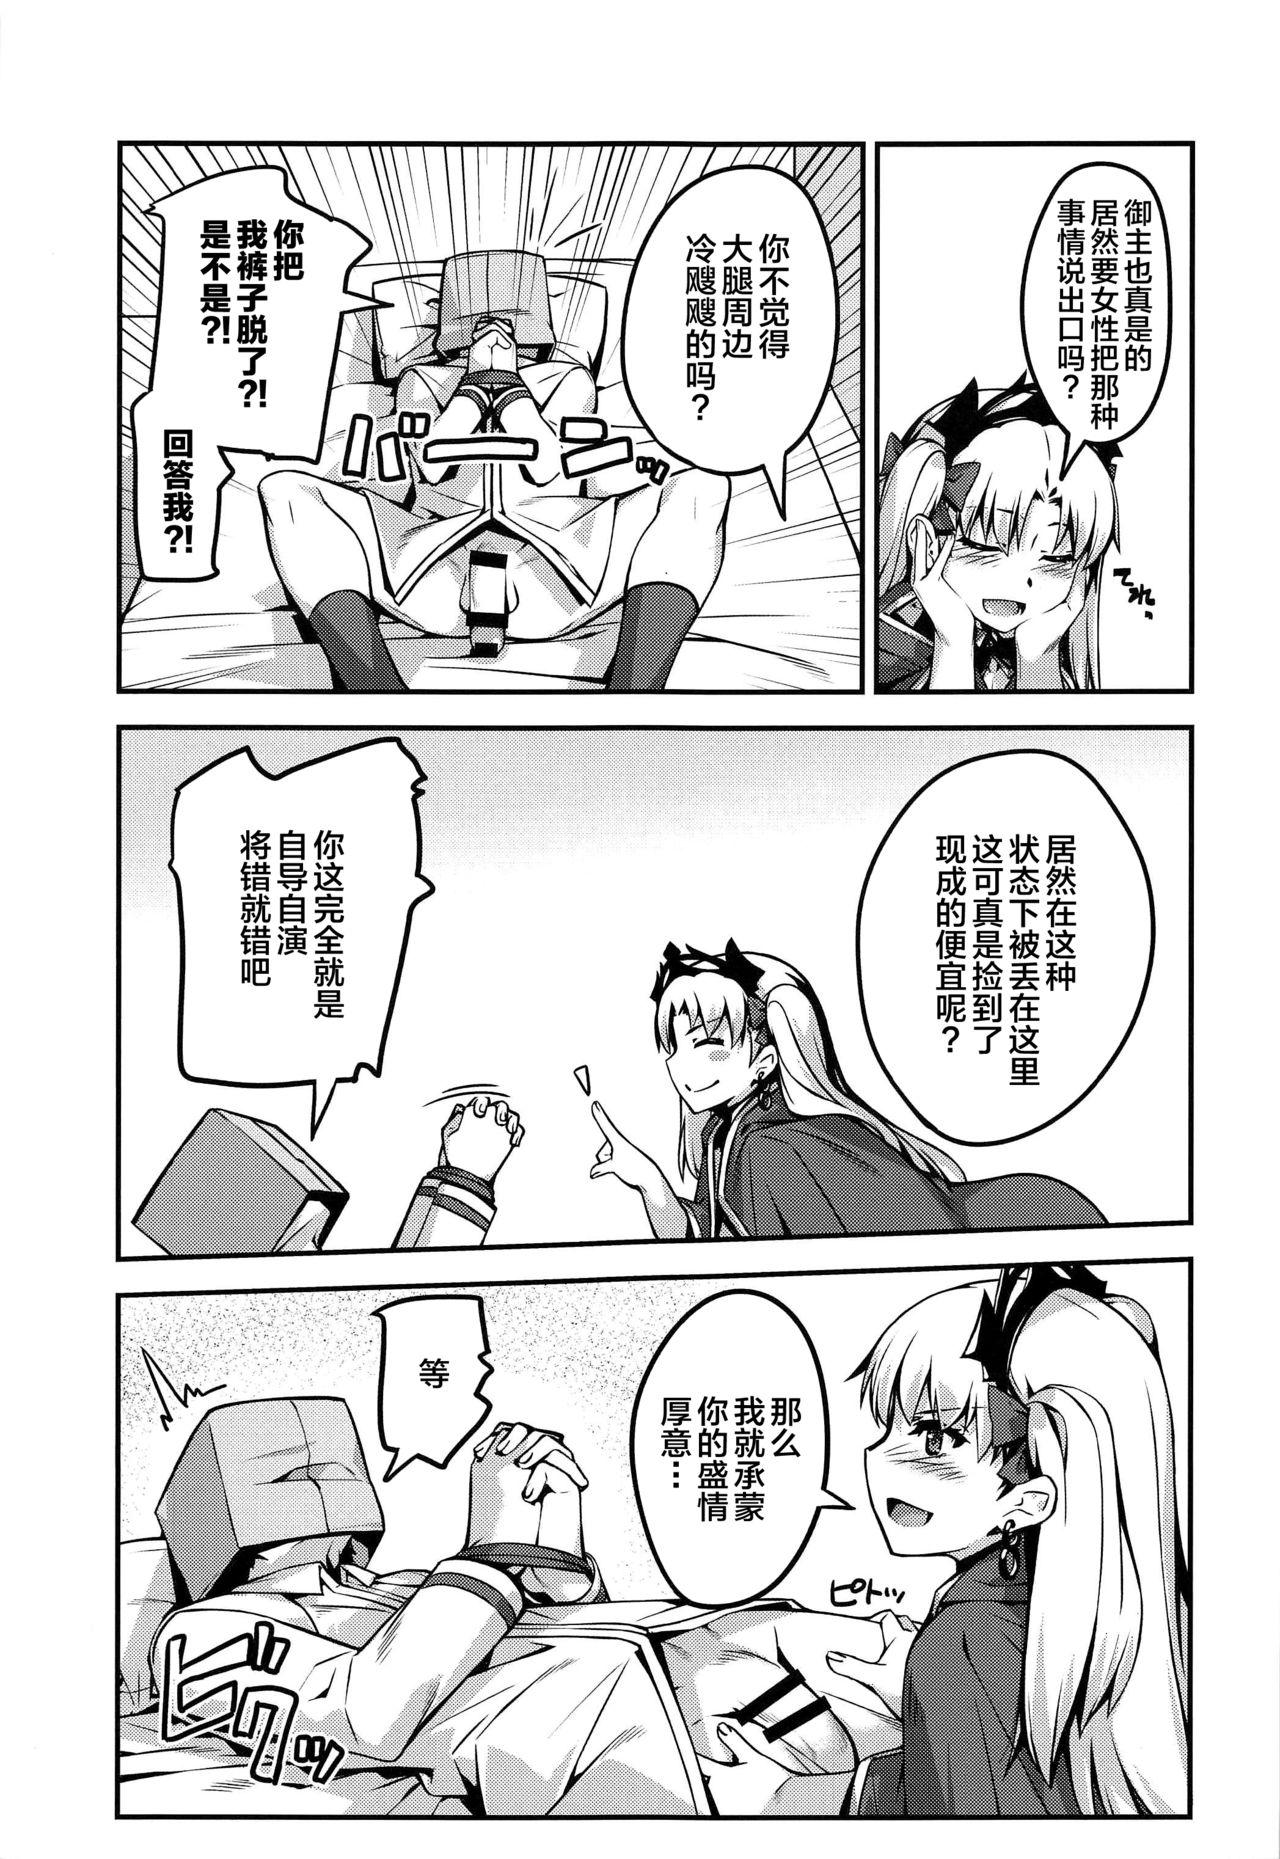 Online Hiroigui. - Fate grand order Tiny Titties - Page 8